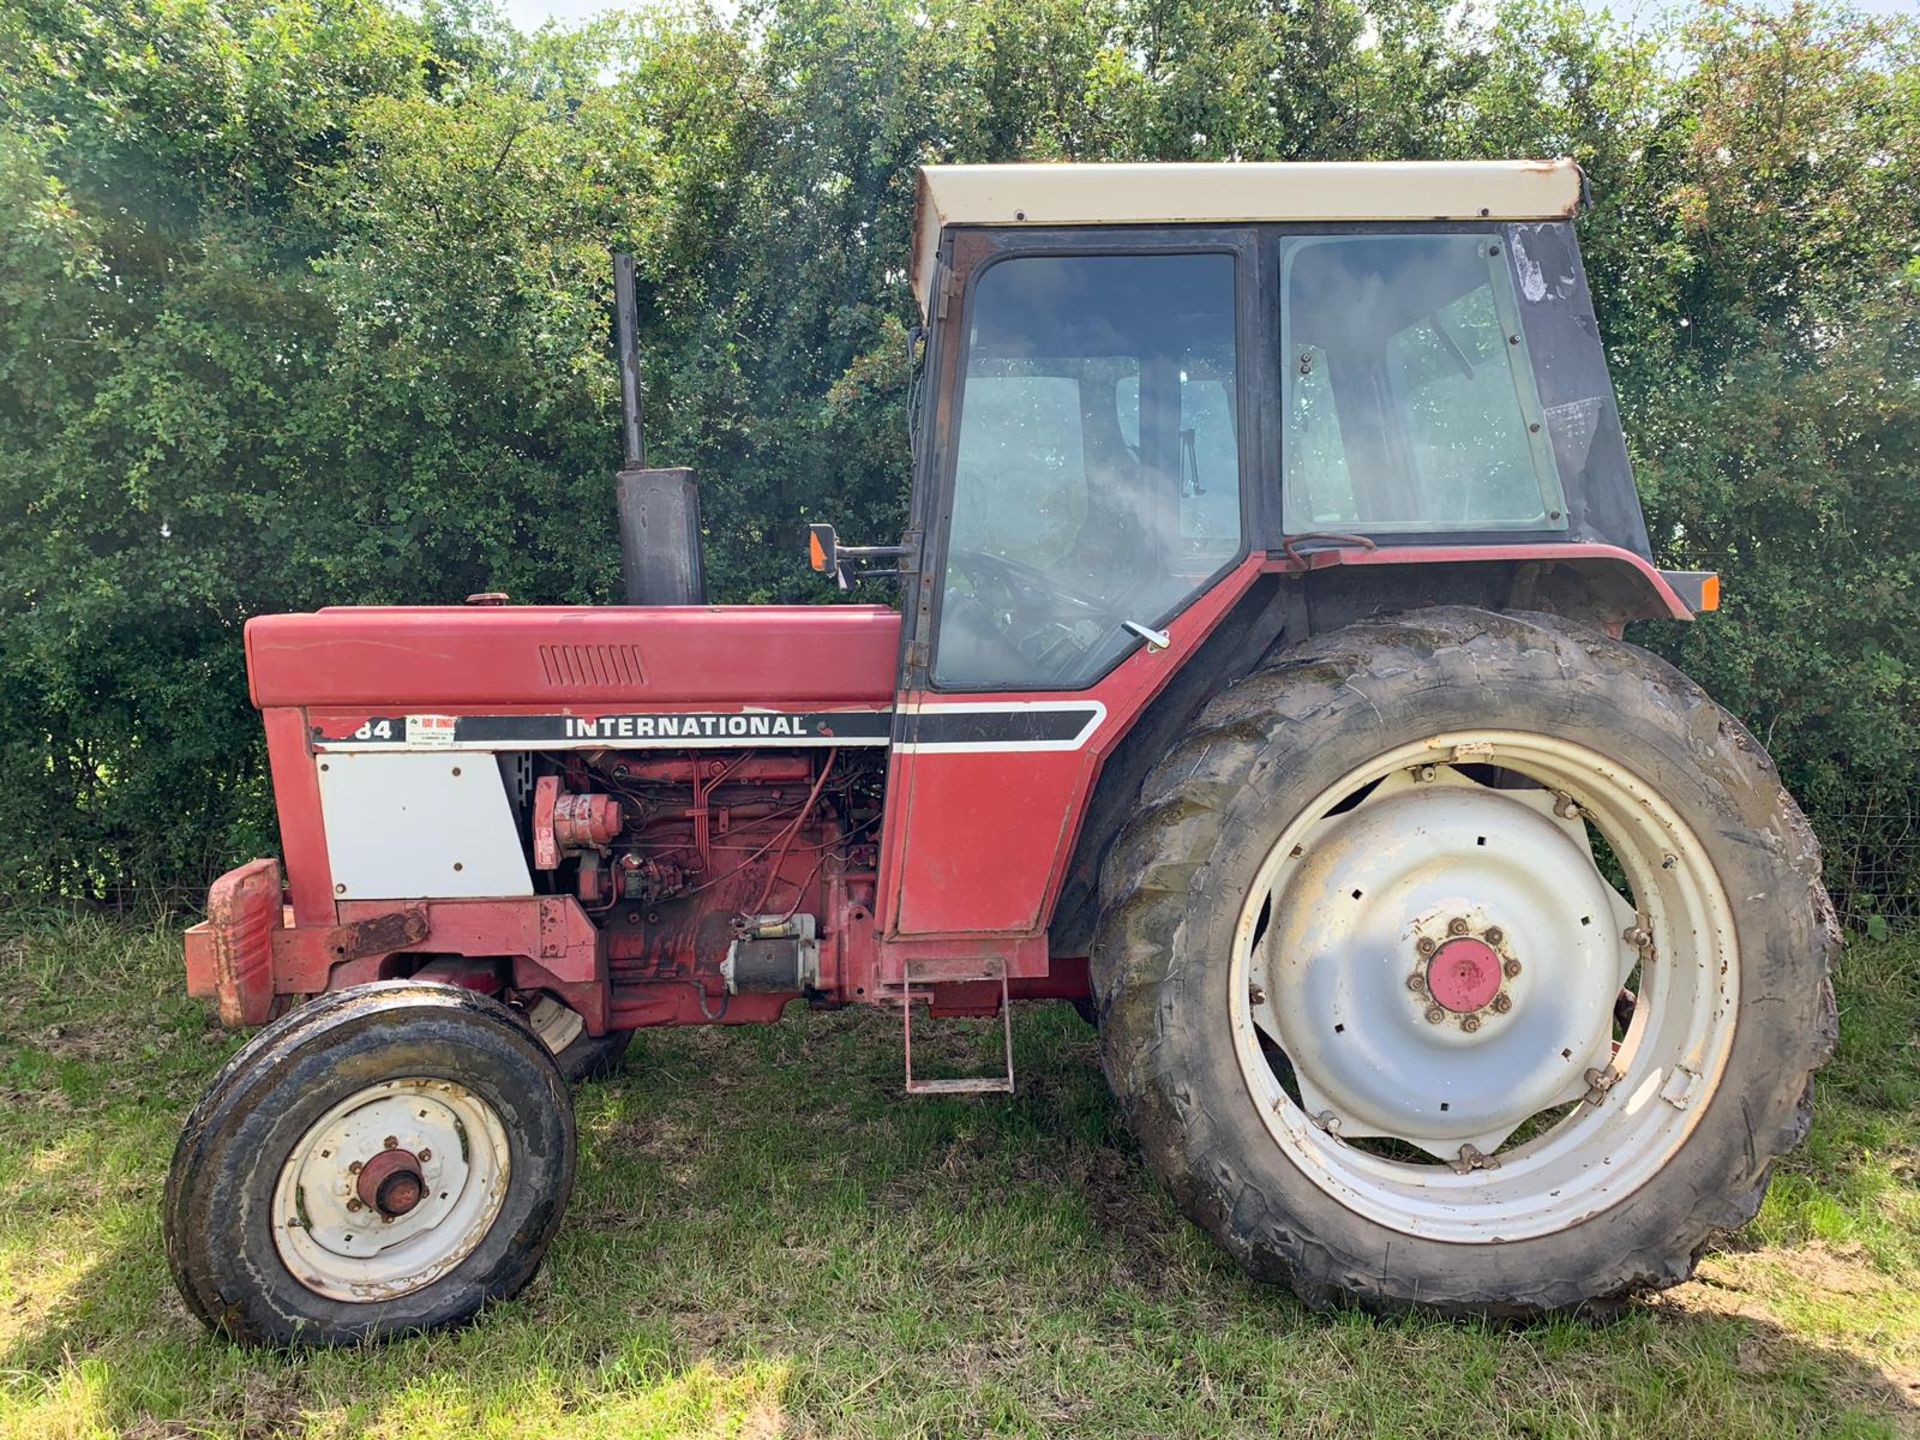 RED INTERNATIONAL HARVESTER 784 DIESEL TRACTOR WITH FULL GLASS CAB, RUNS AND WORKS *PLUS VAT* - Image 2 of 13